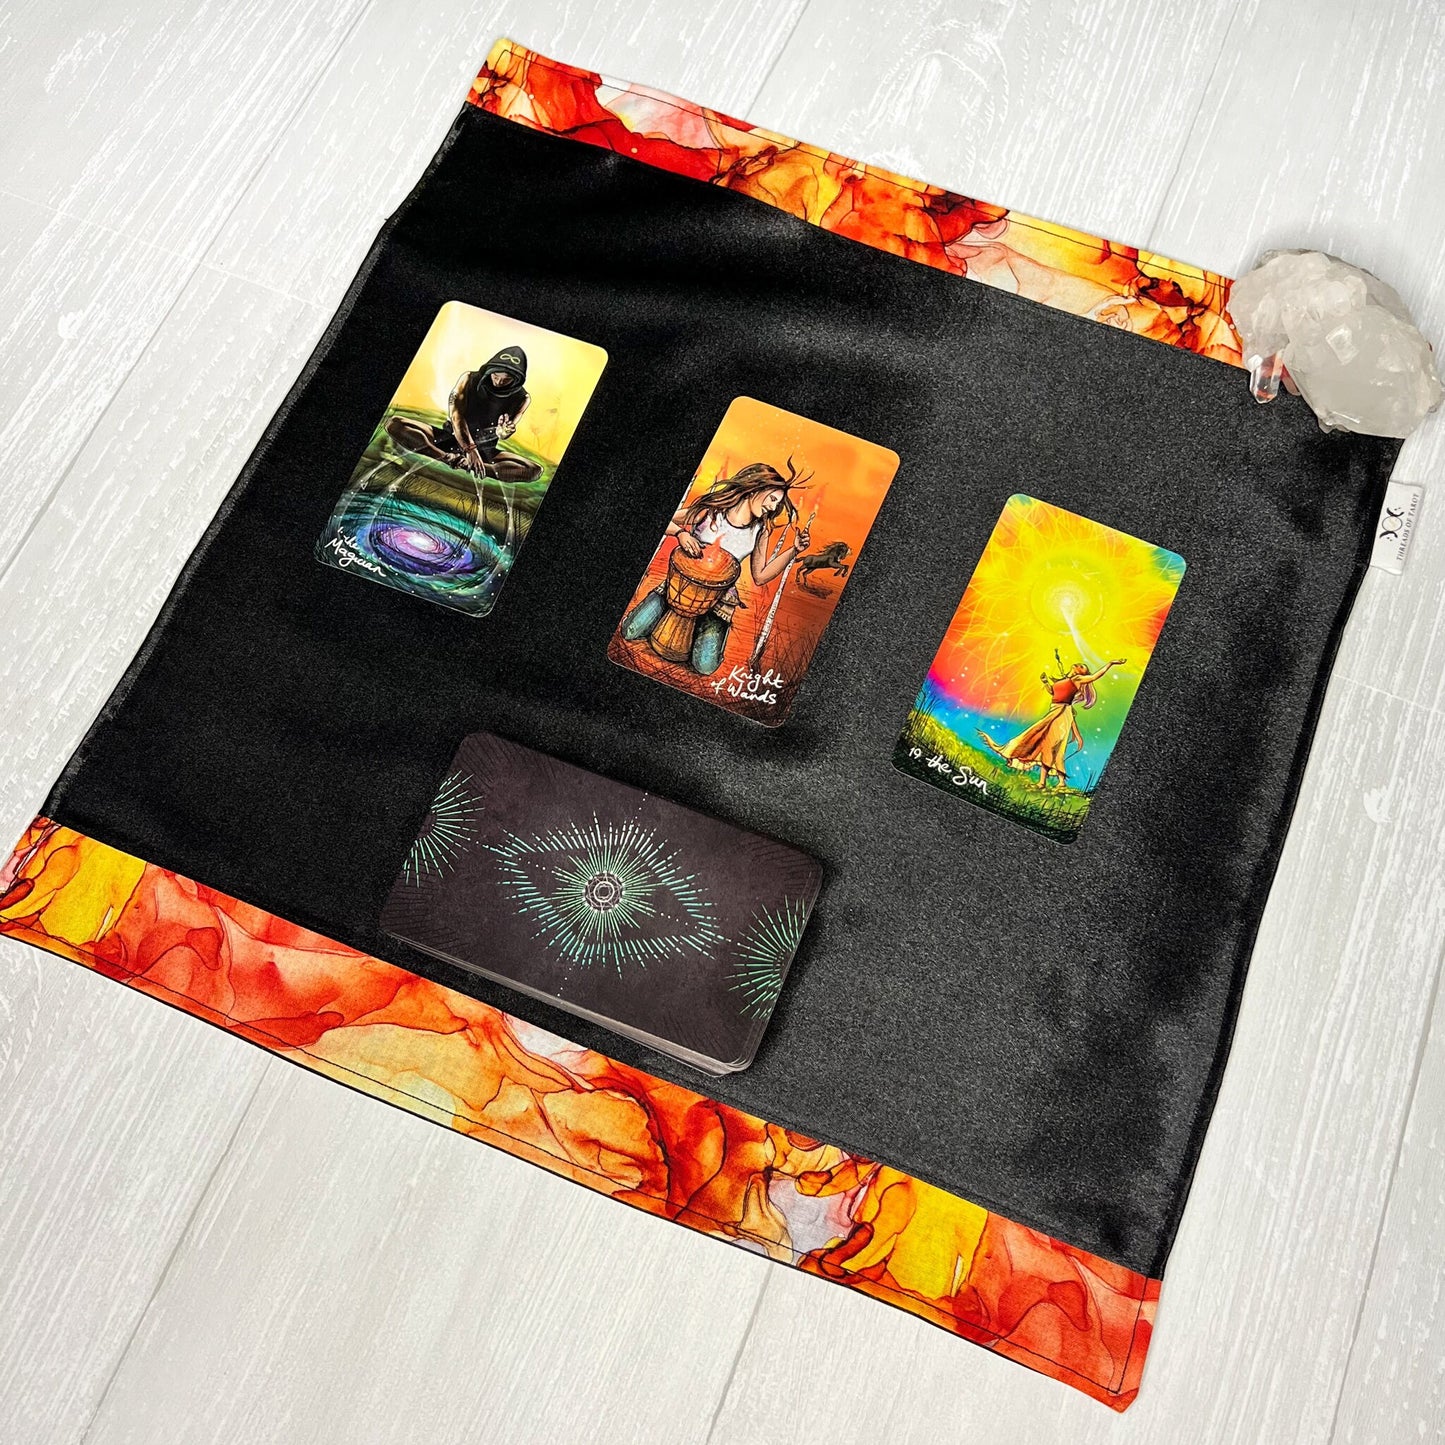 Black Altar Cloth with Fiery Border Detail, Ritual Cloth, Rune Casting, Tarot Reading Cloth, Witchy Gift Supplies, Divination Tools